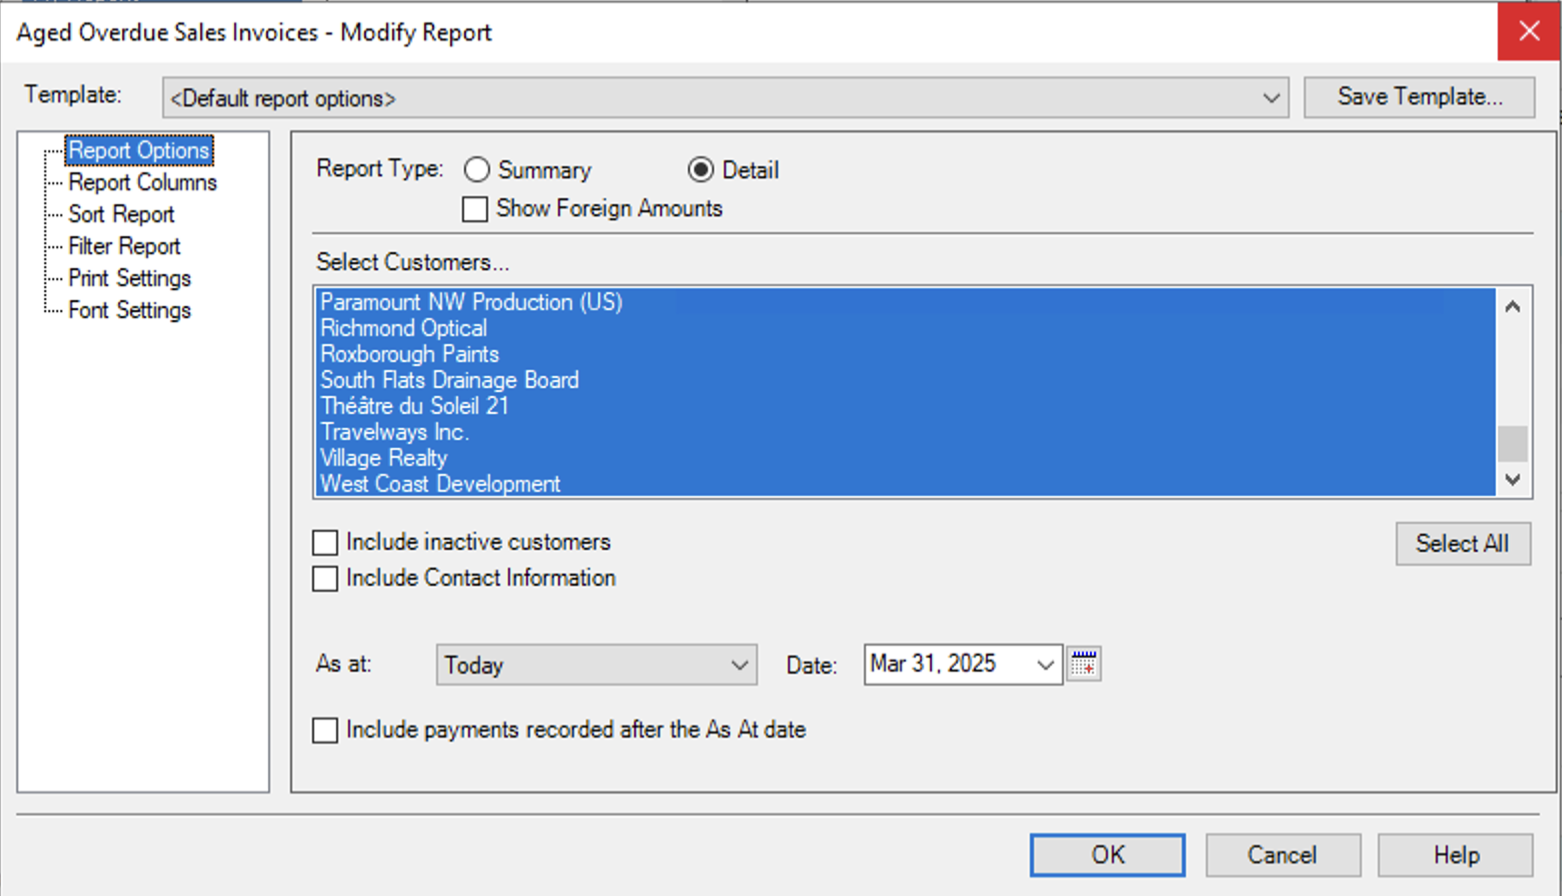 Modifying the Aged Overdue Sales Invoices report.